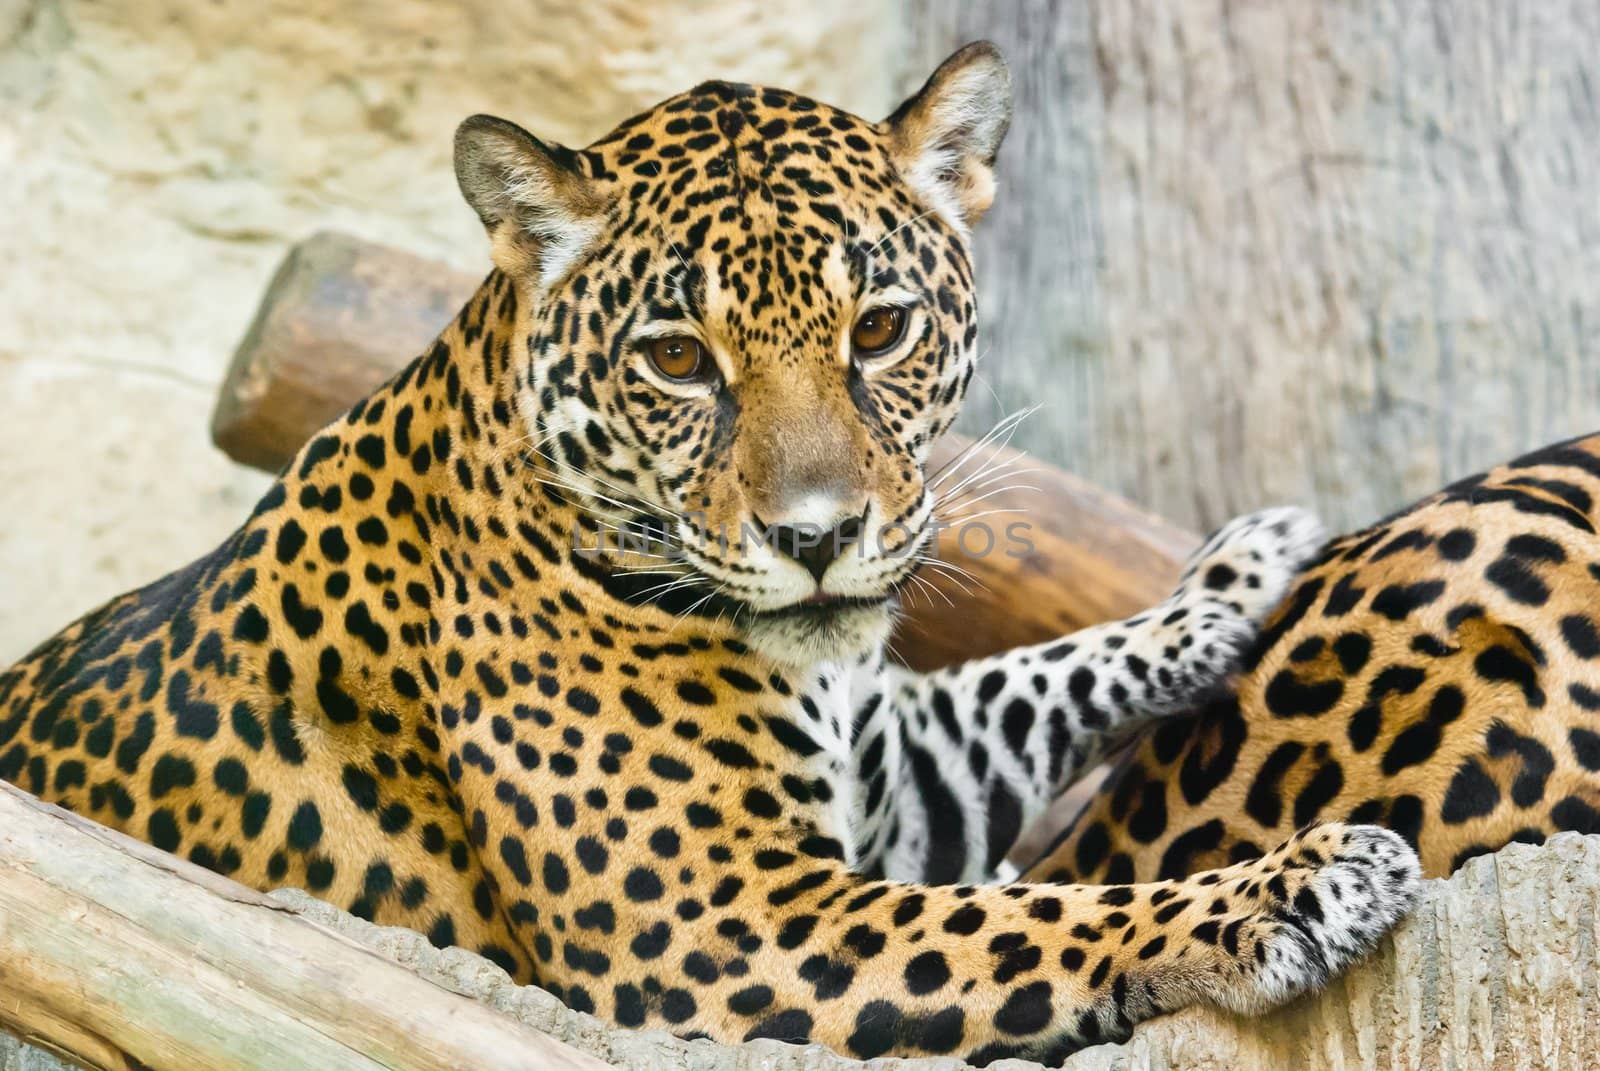 Wild Leopard, taken on a sunny day, can be use for various wild animal concepts and print outs